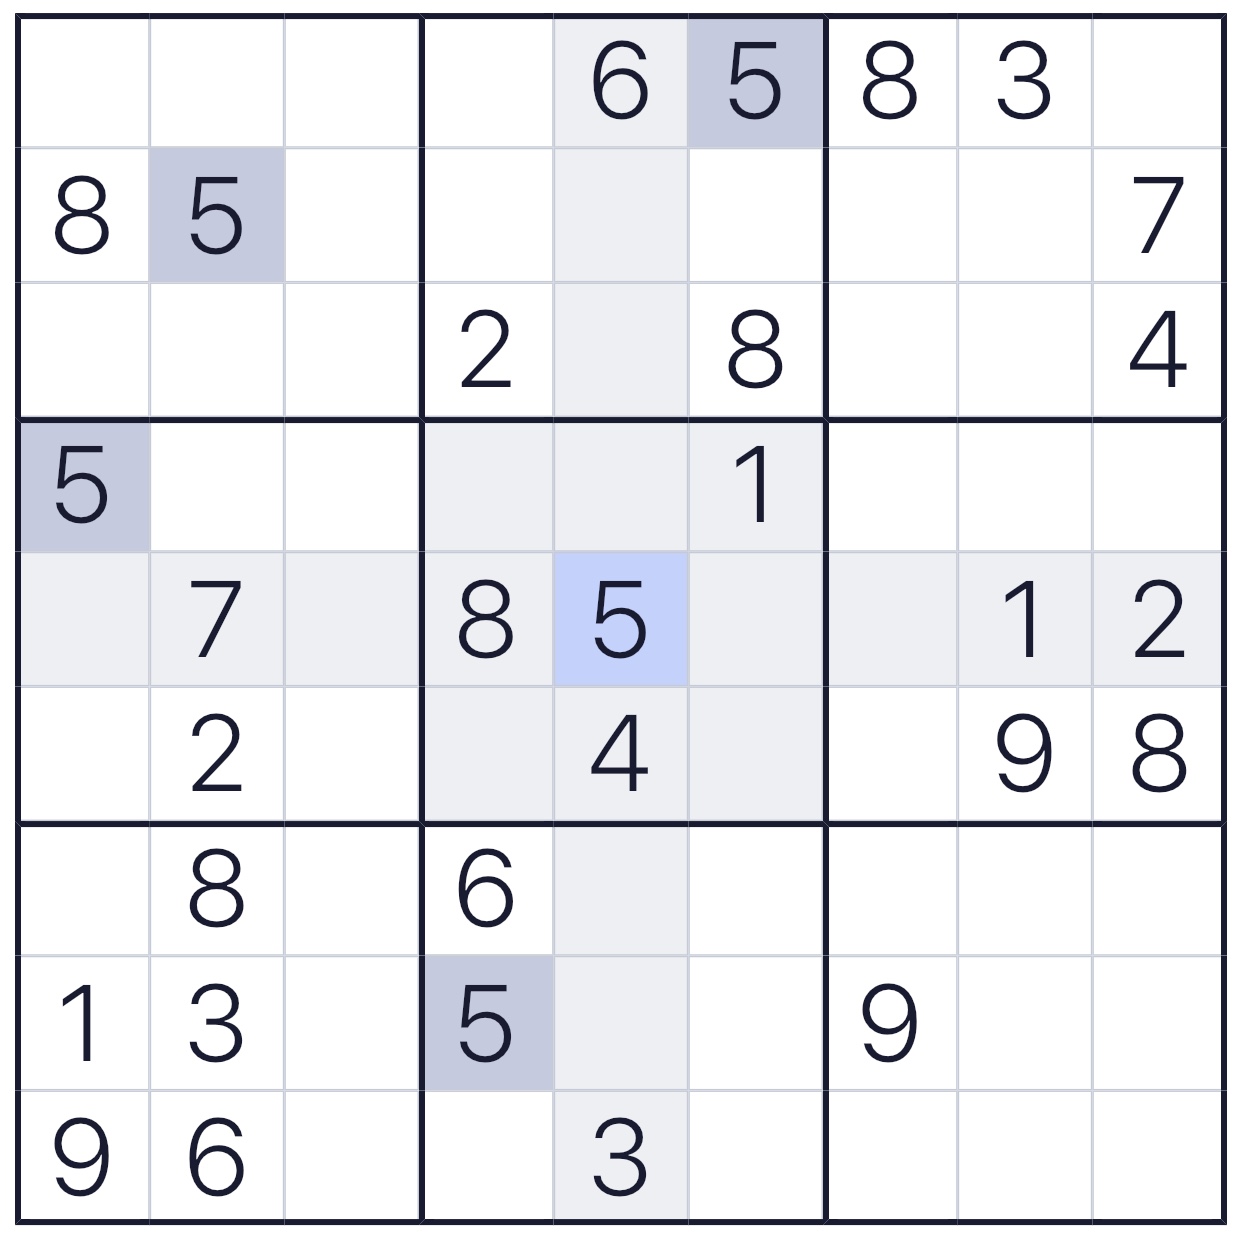 Sudoku will soon be available in Teslas